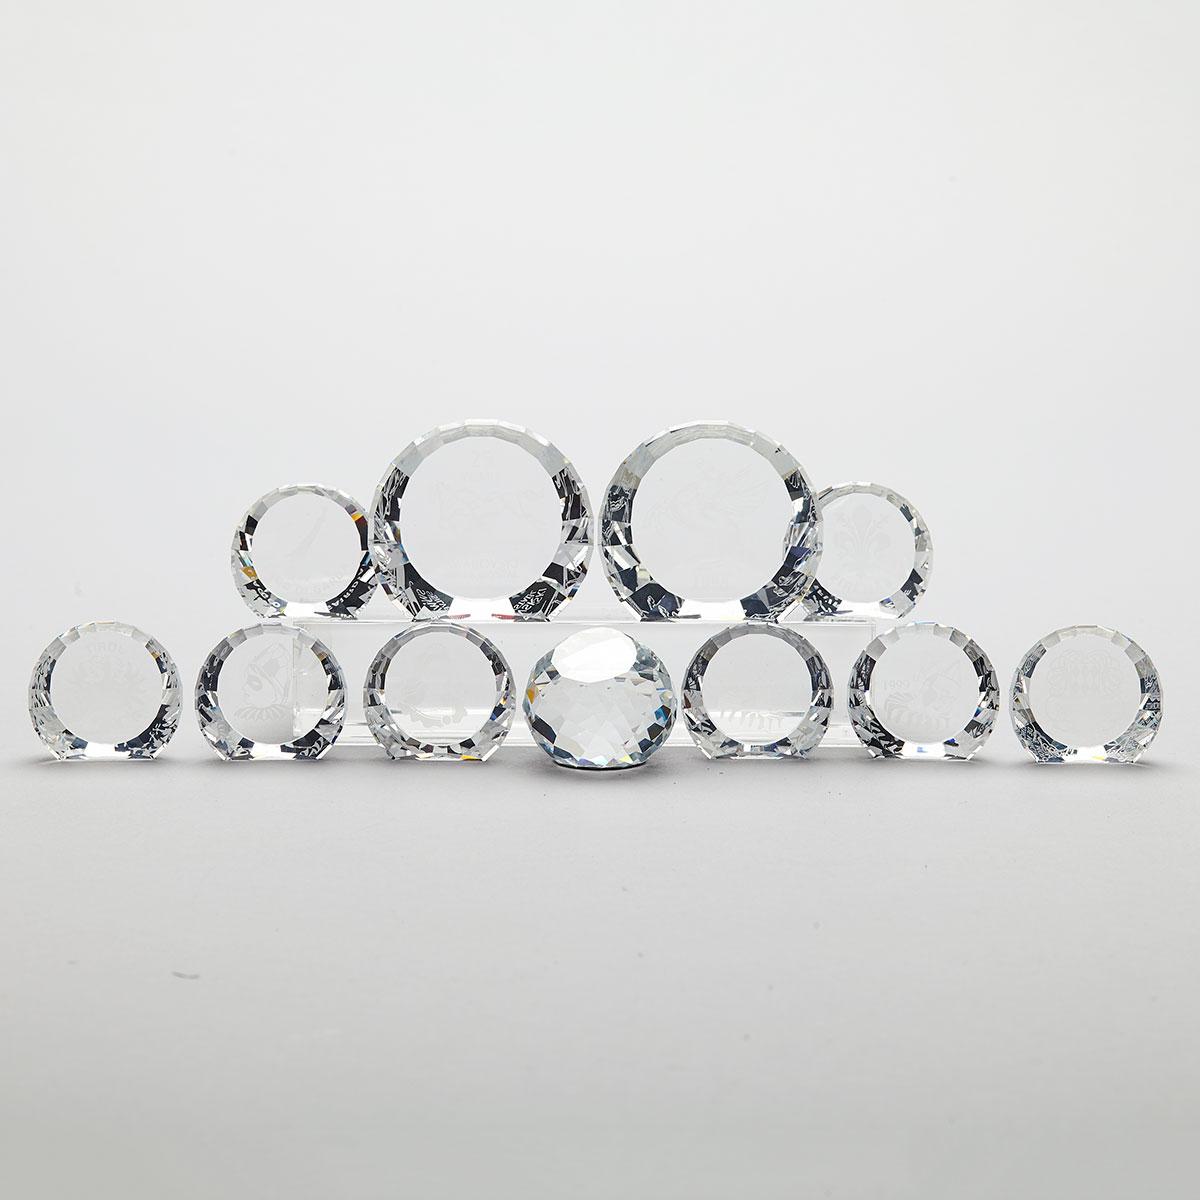 Eleven Swarovski Crystal Paperweights, late 20th/early 21st century